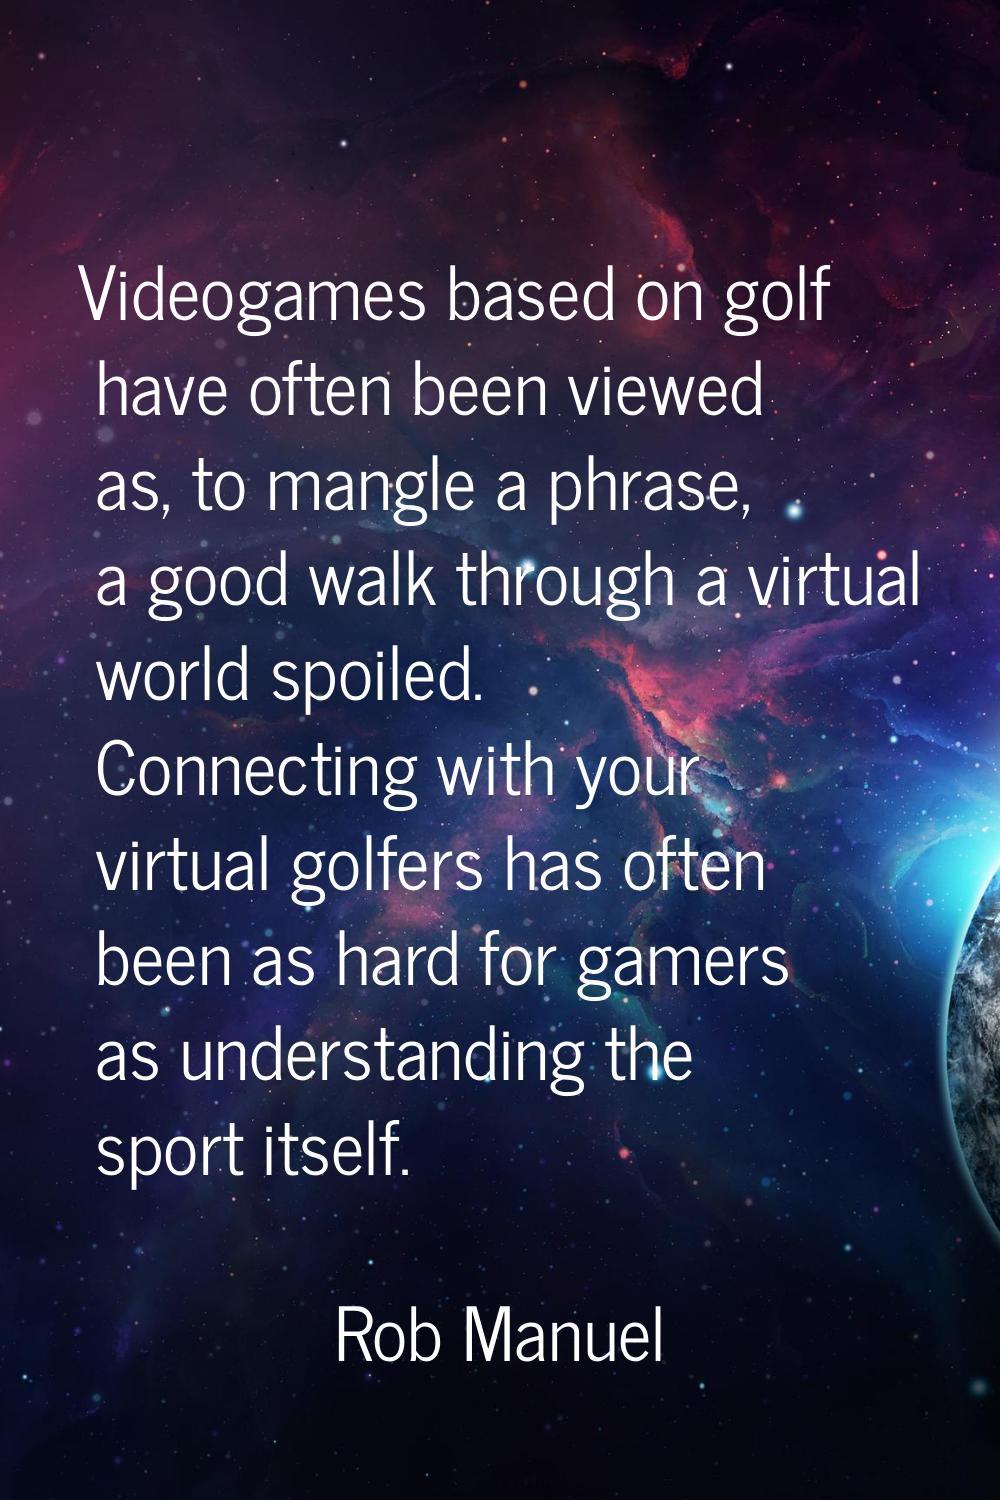 Videogames based on golf have often been viewed as, to mangle a phrase, a good walk through a virtu